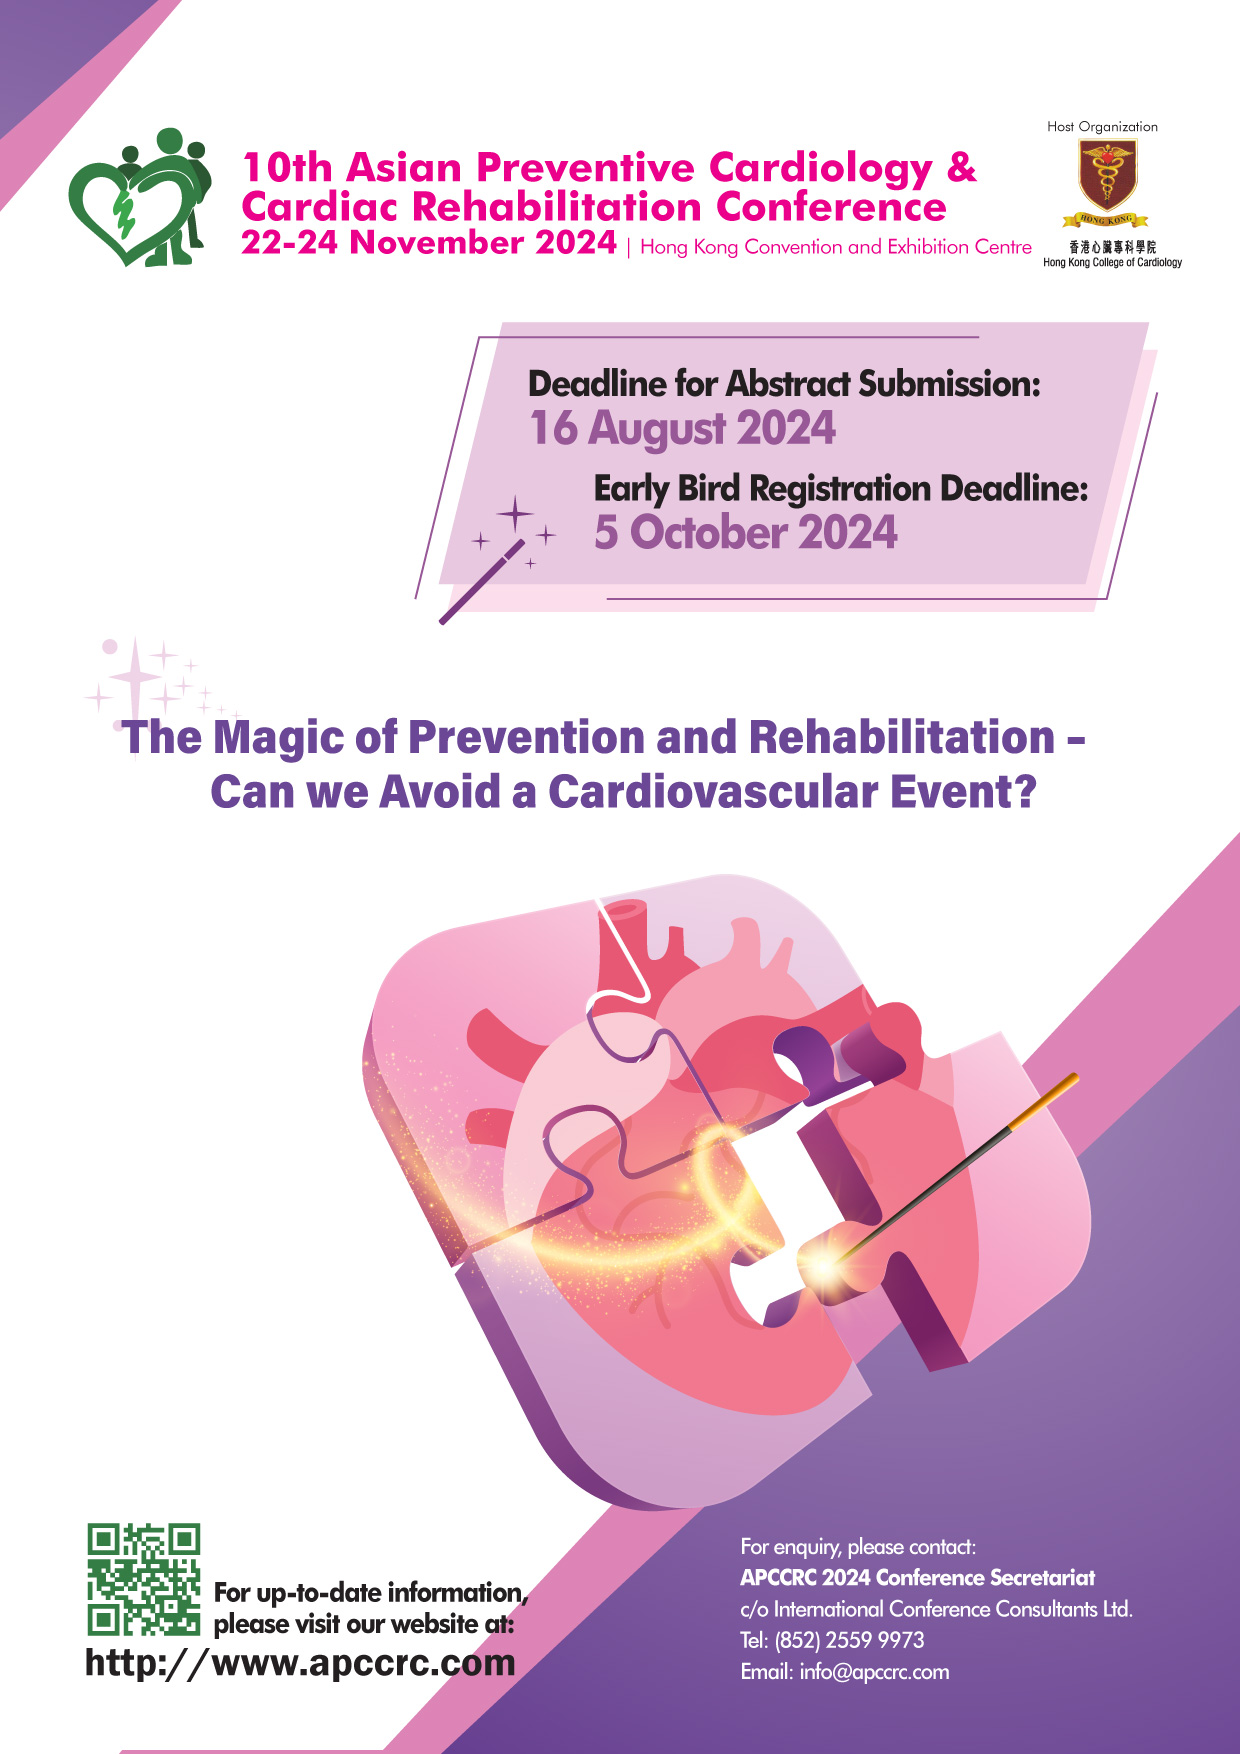 10th Asian Preventive Cardiology and Cardiac Rehabilitation Conference